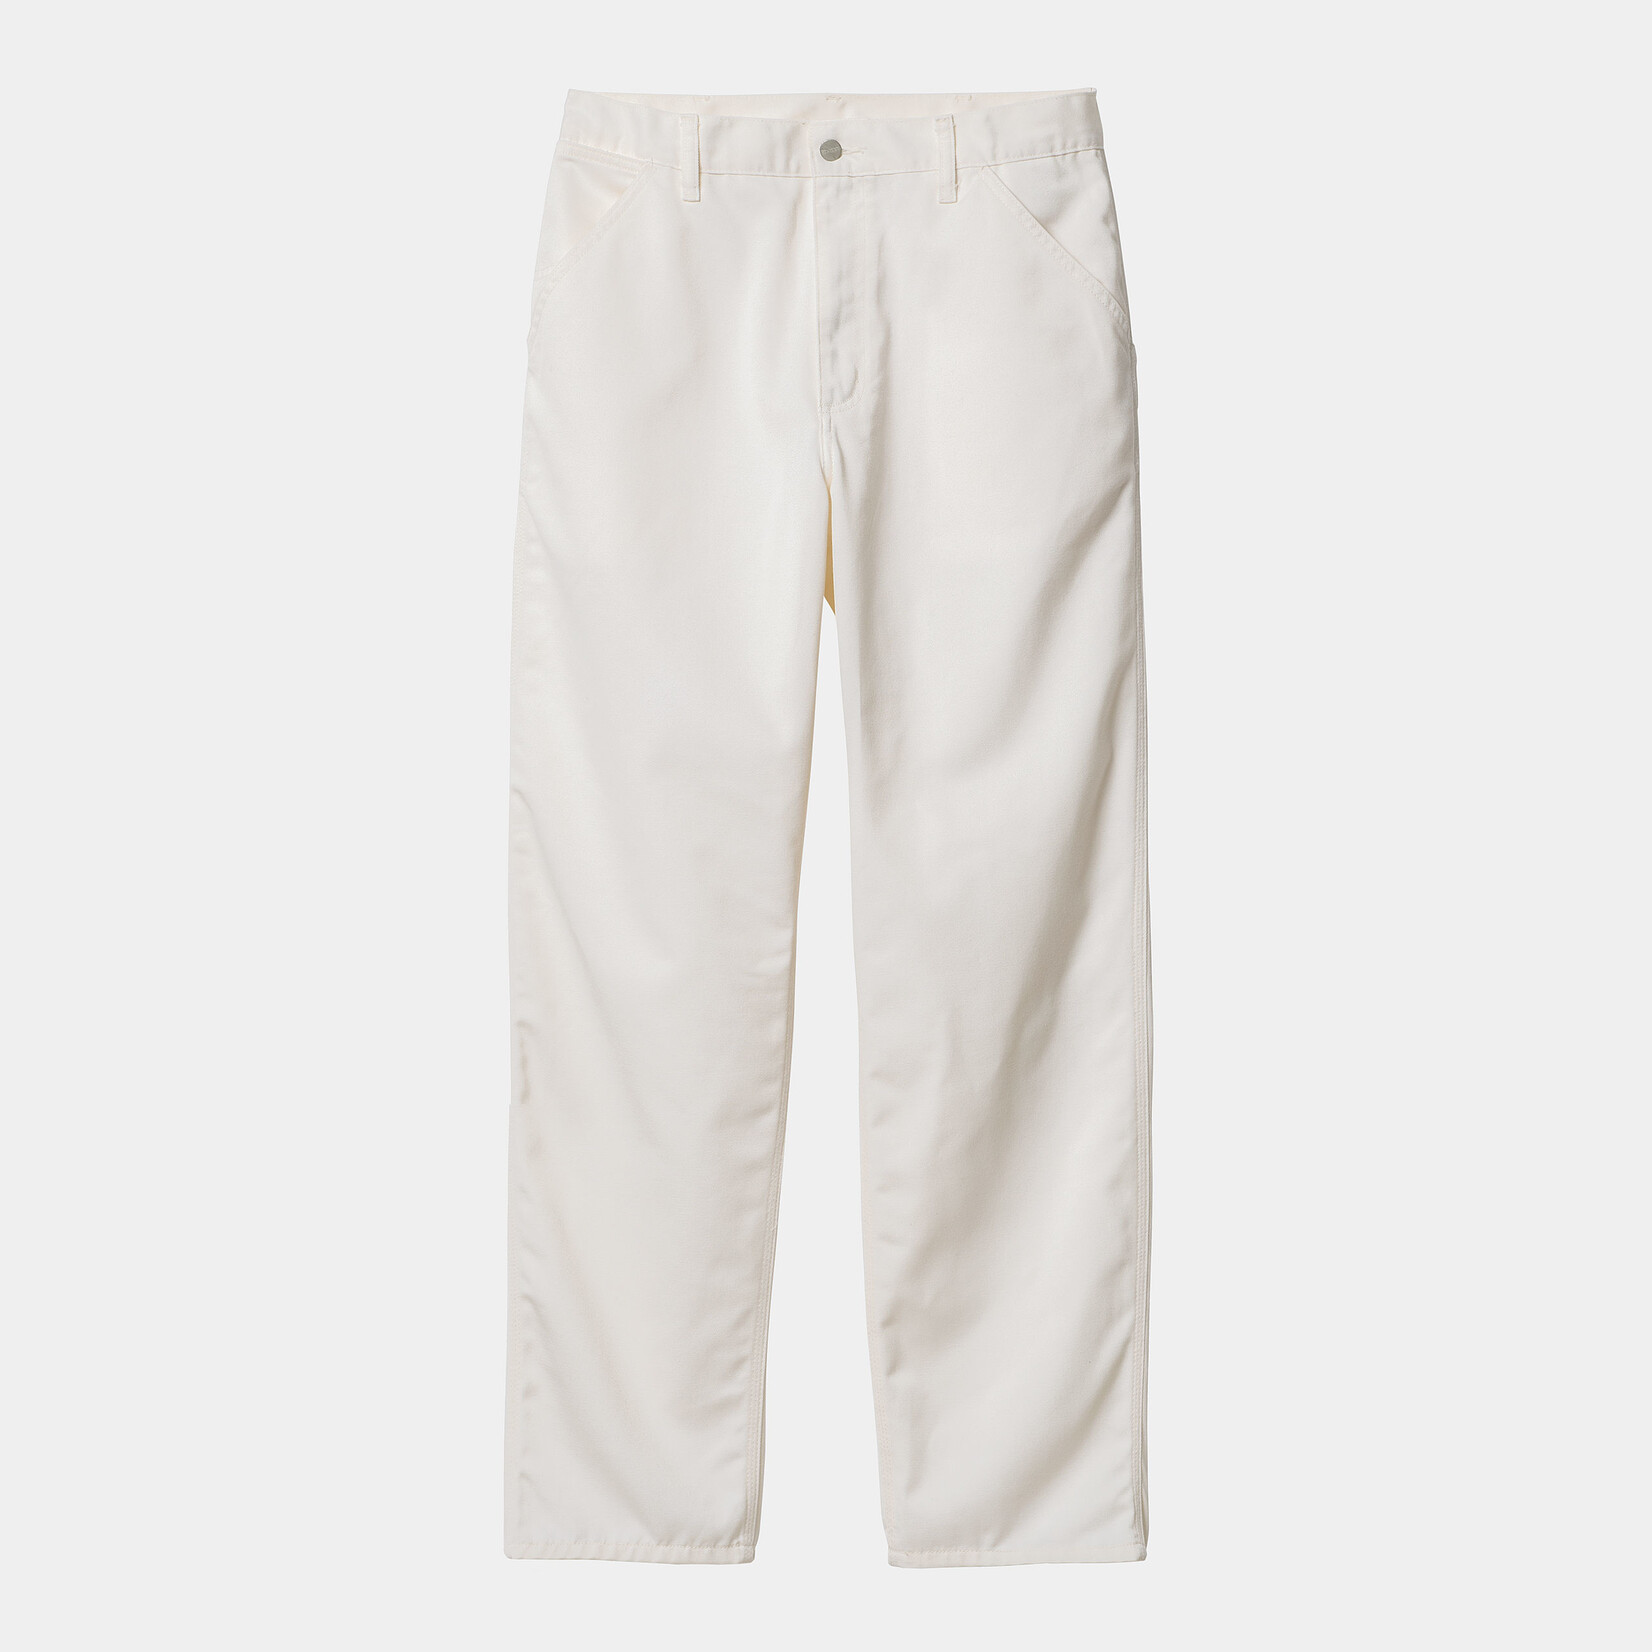 CARHARTT WIP SIMPLE PANT POLYESTER/COTTON L32